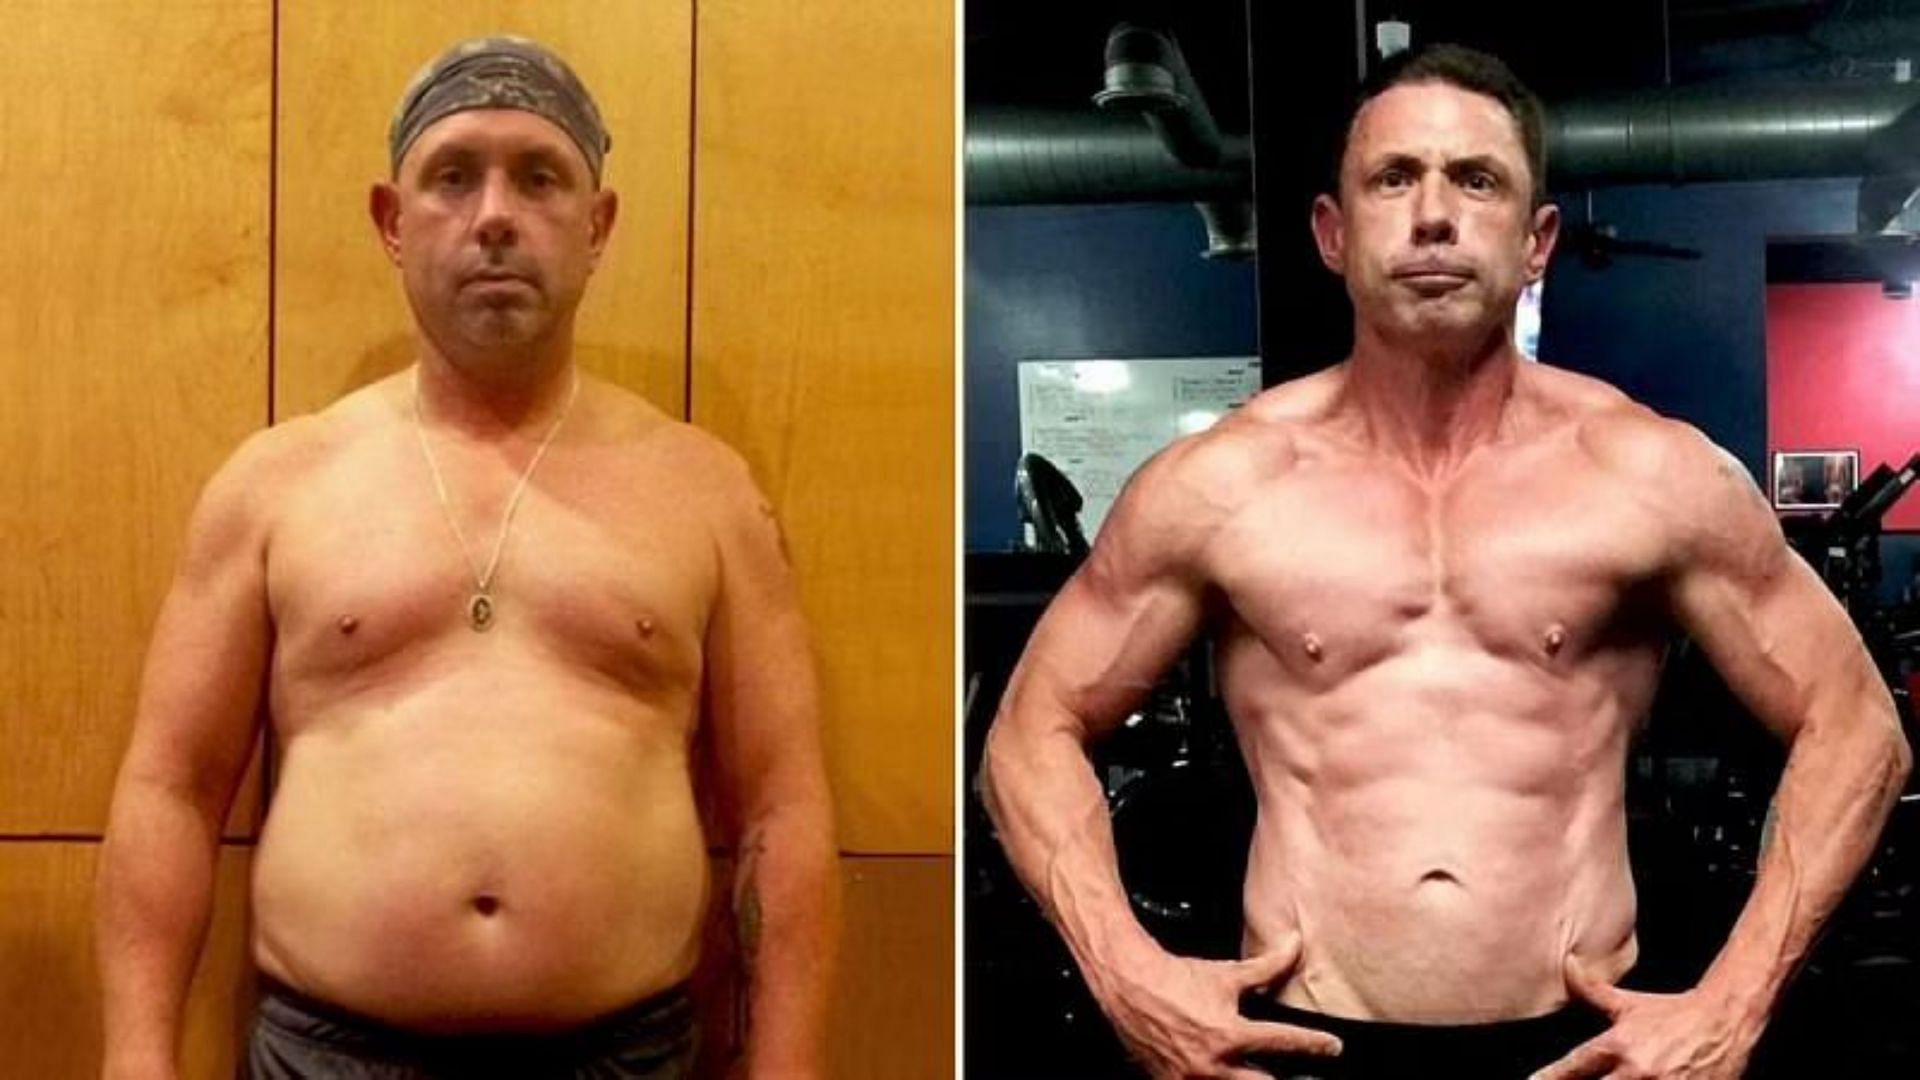 Michael Cole lost nearly 65 lbs